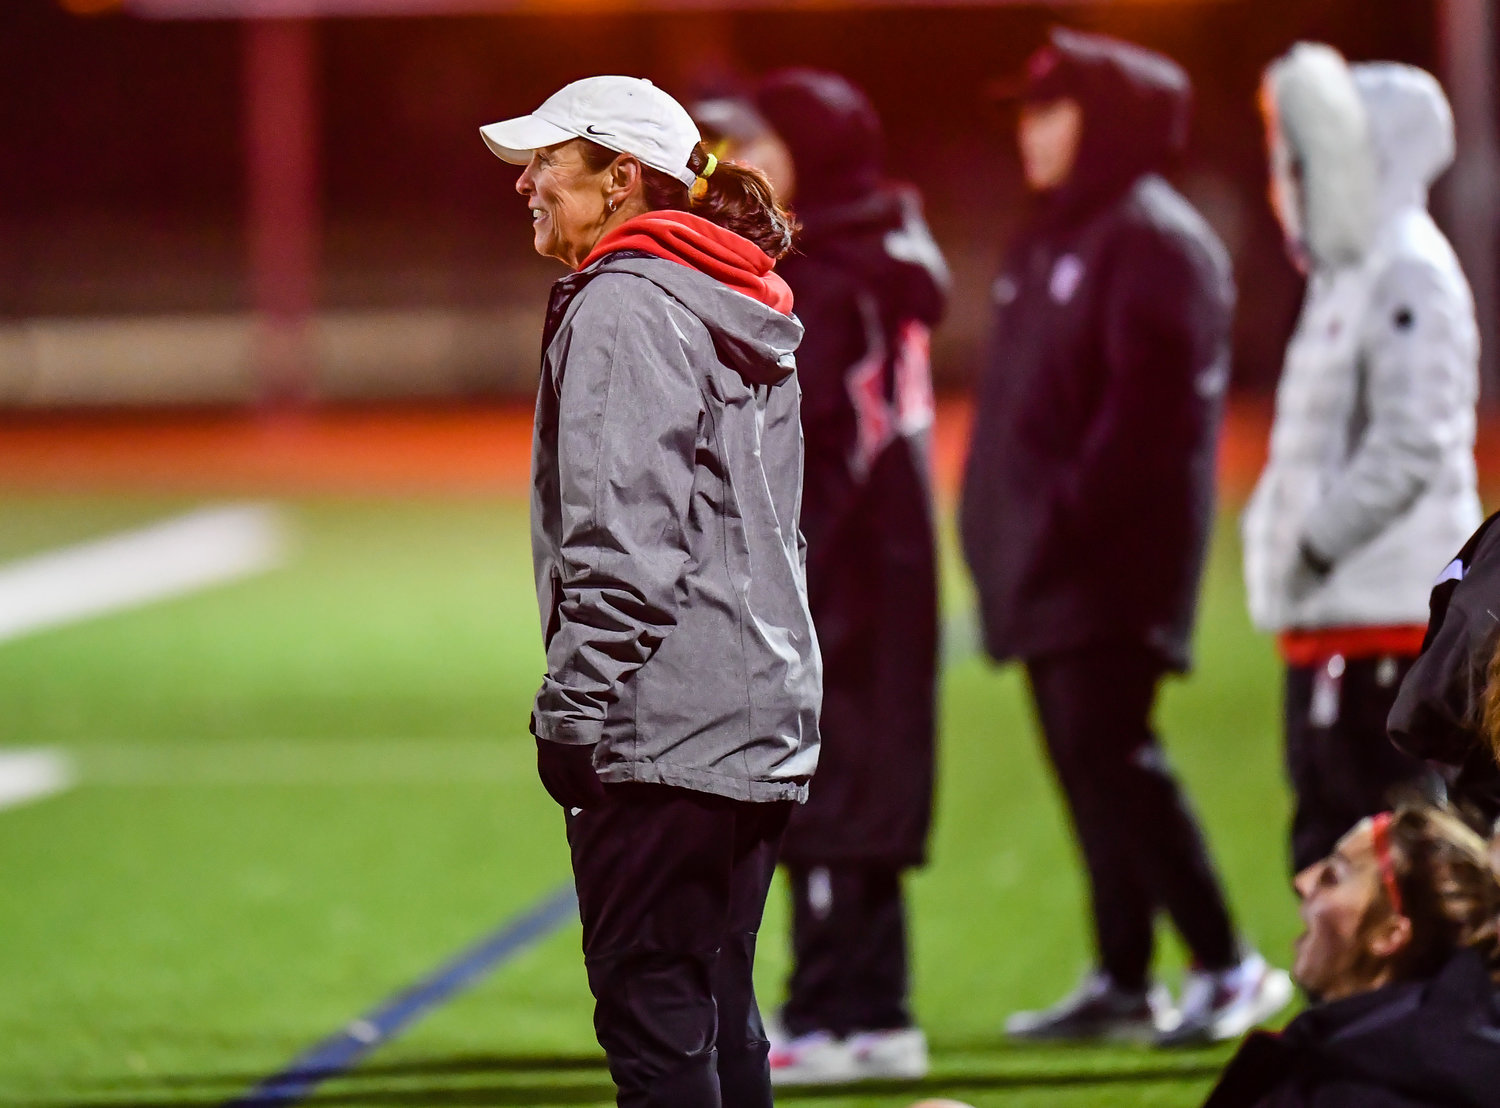 March 8,, 2022: Katy's head coach Dianne Loftin looks on at her lady Tigers during their soccer match against Katy Taylor at KHS. (Photo by Mark Goodman / Katy Times)